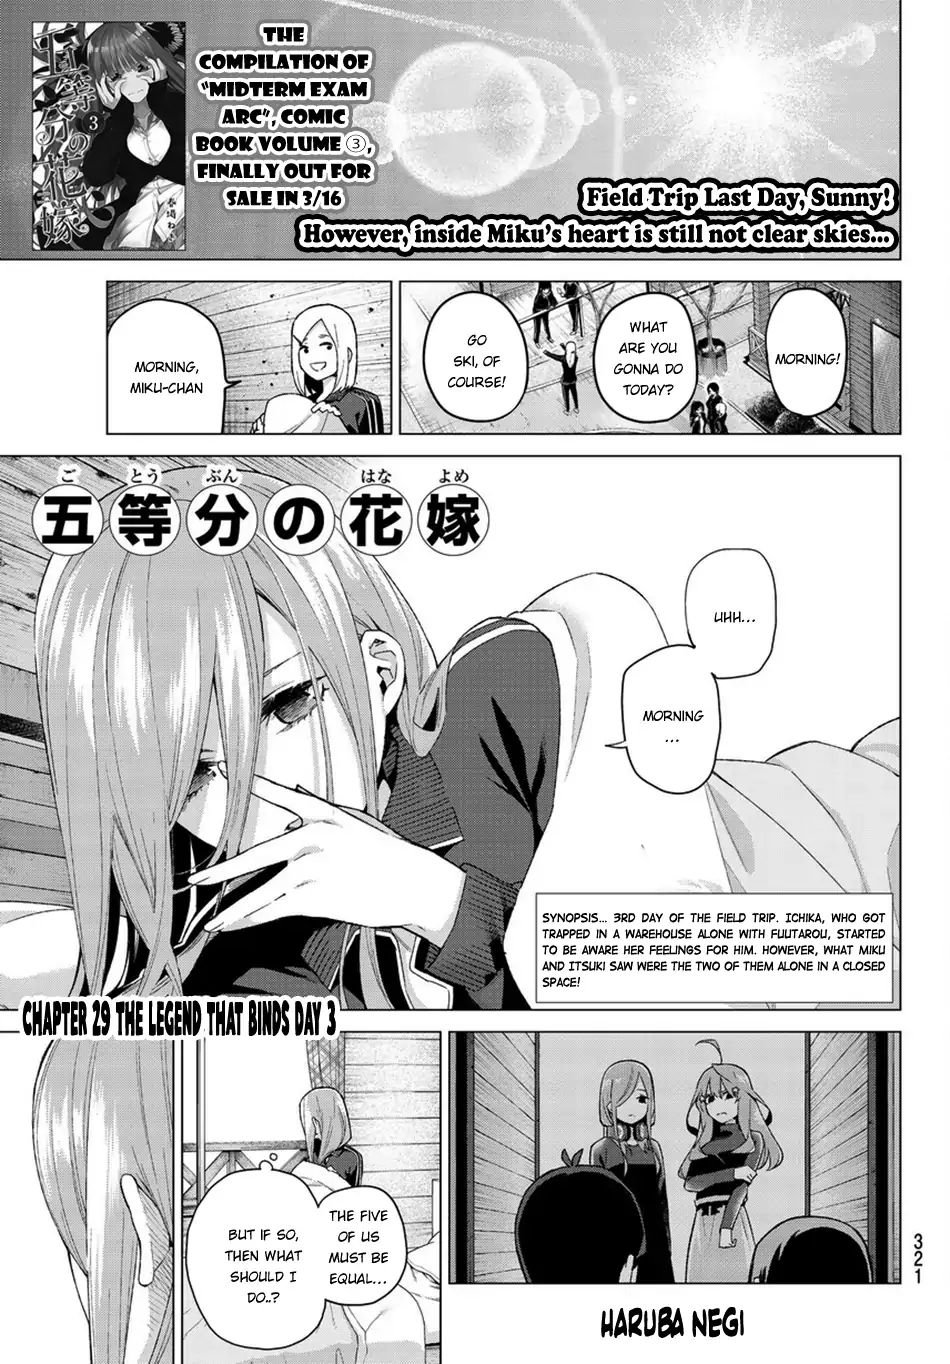 Go-Toubun No Hanayome Vol.4 Chapter 29: The Legend That Binds - Day Three - Picture 2